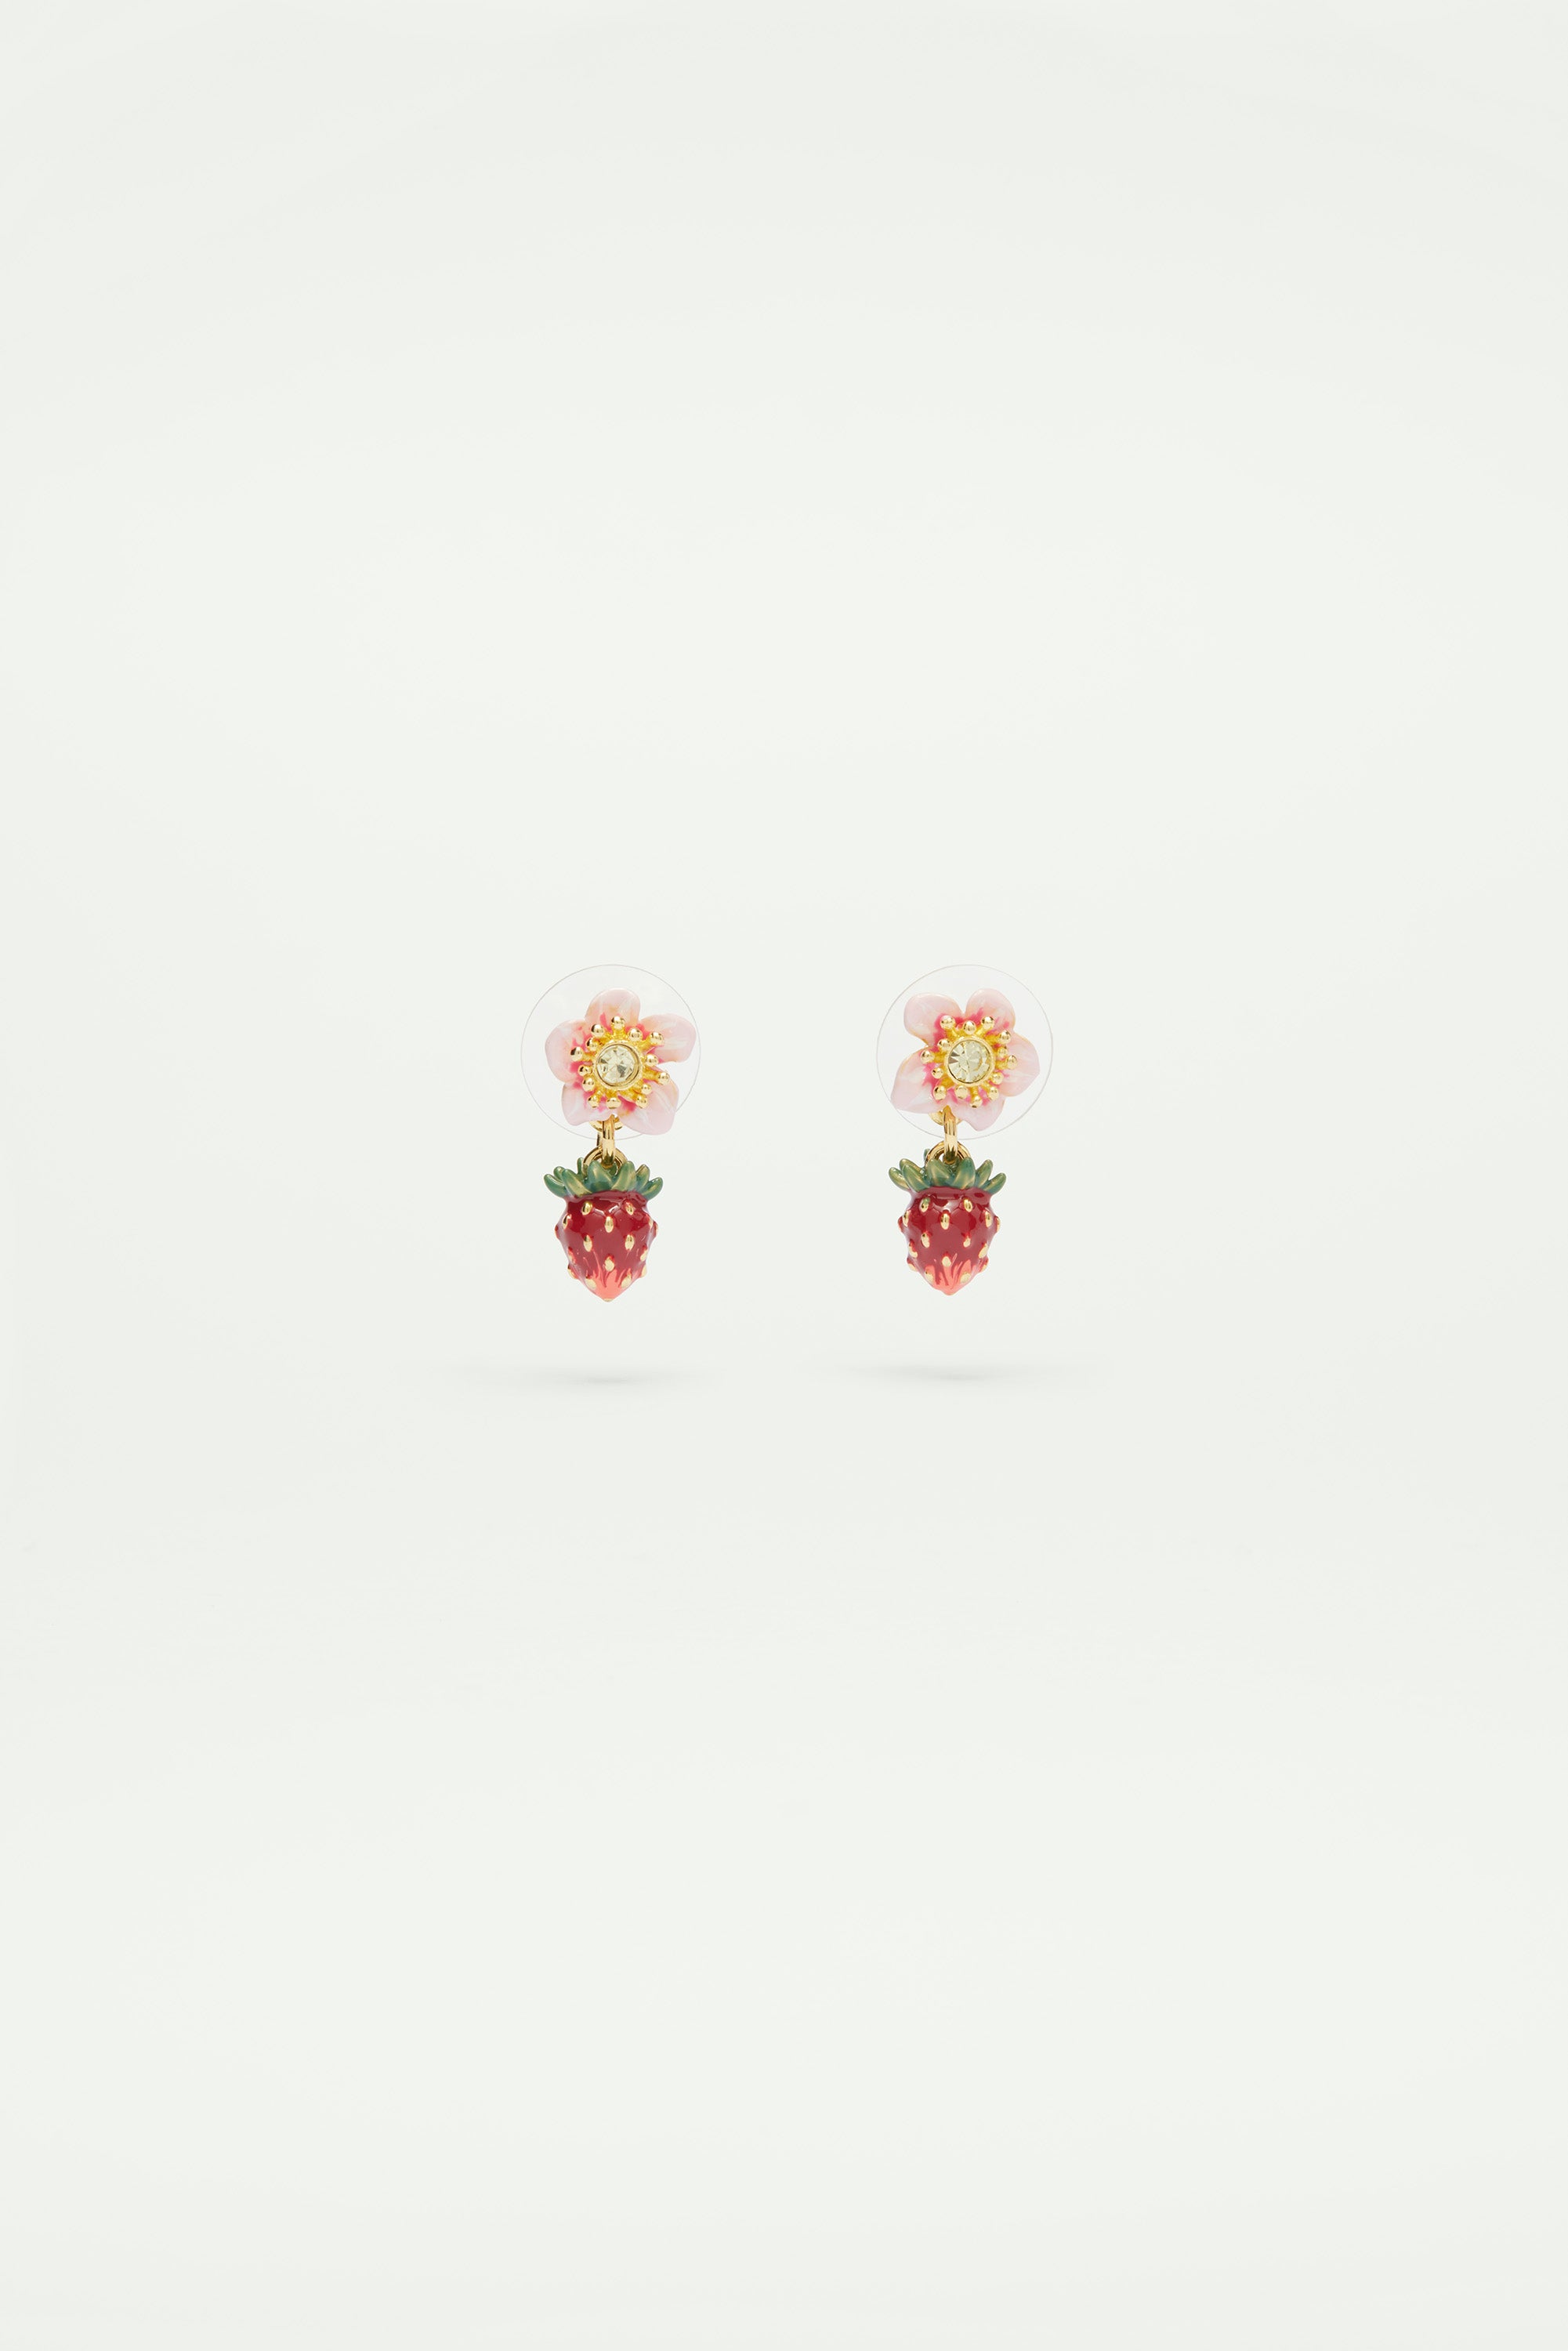 Wild strawberry and rose post earrings